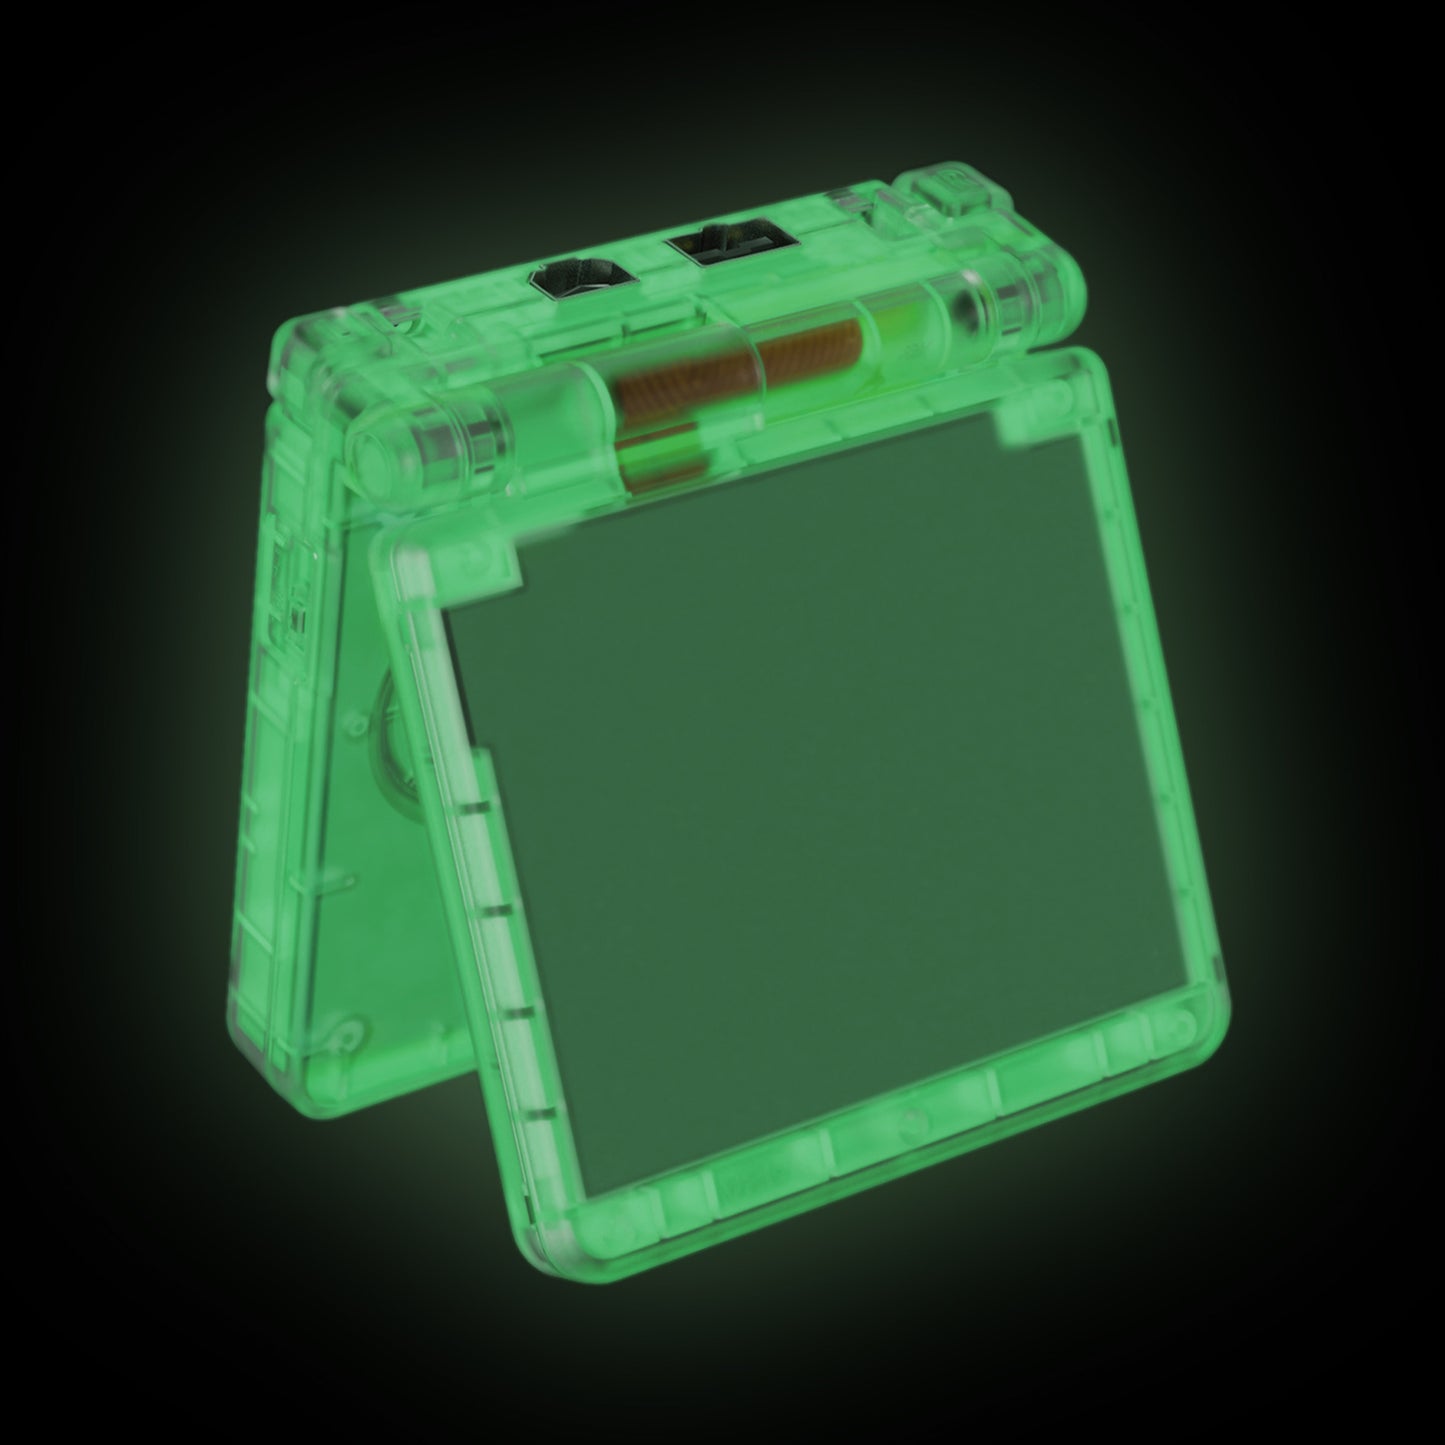 eXtremeRate Retail IPS Ready Upgraded eXtremeRate Glow in Dark - Green Custom Replacement Housing Shell for Gameboy Advance SP GBA SP – Compatible with Both IPS & Standard LCD – Console & Screen NOT Included - ASPM5008